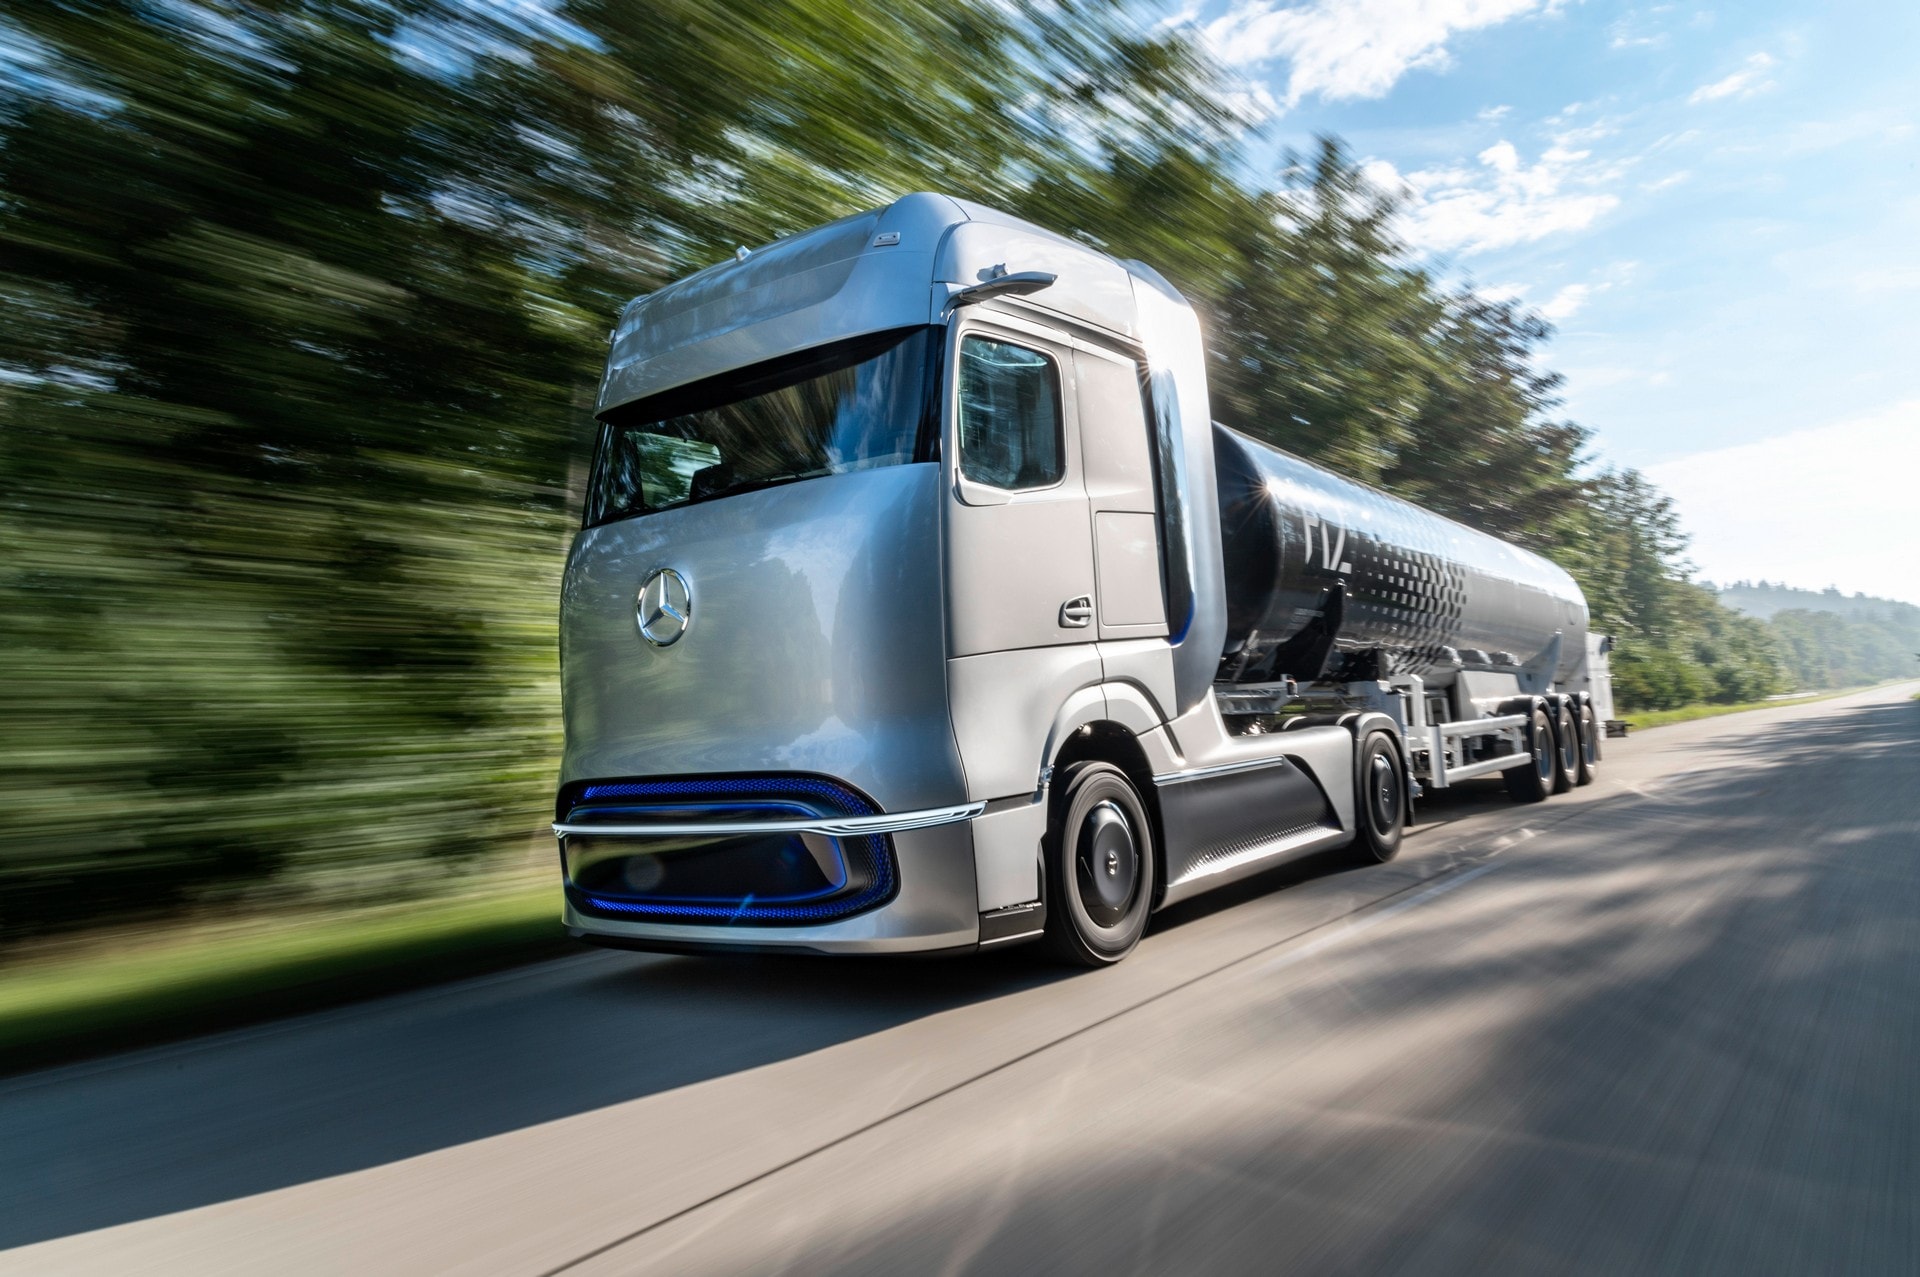 MercedesBenz GenH2 Truck Might Be the Biggest Visual Let